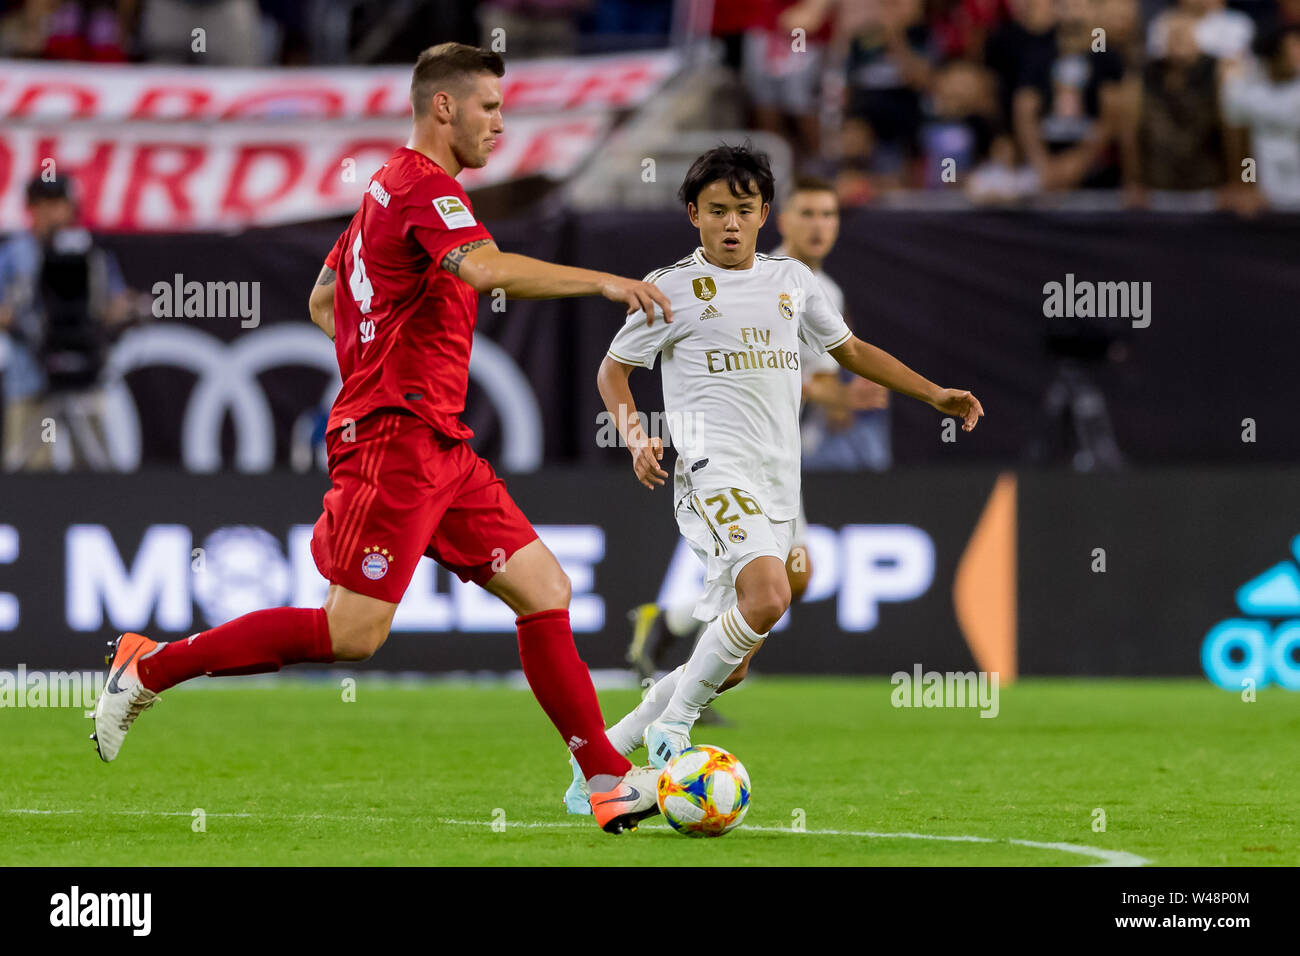 Houston, Texas, USA. 20th July, 2019. Real Madrid forward Takefusa Kubo (26) goes for the ball from Bayern Munich defender Niklas Sule (4) during the International Champions Cup between Real Madrid and Bayern Munich FC at NRG Stadium in Houston, Texas. The final Bayern Munich wins 3-1. © Maria Lysaker/CSM/Alamy Live News Stock Photo